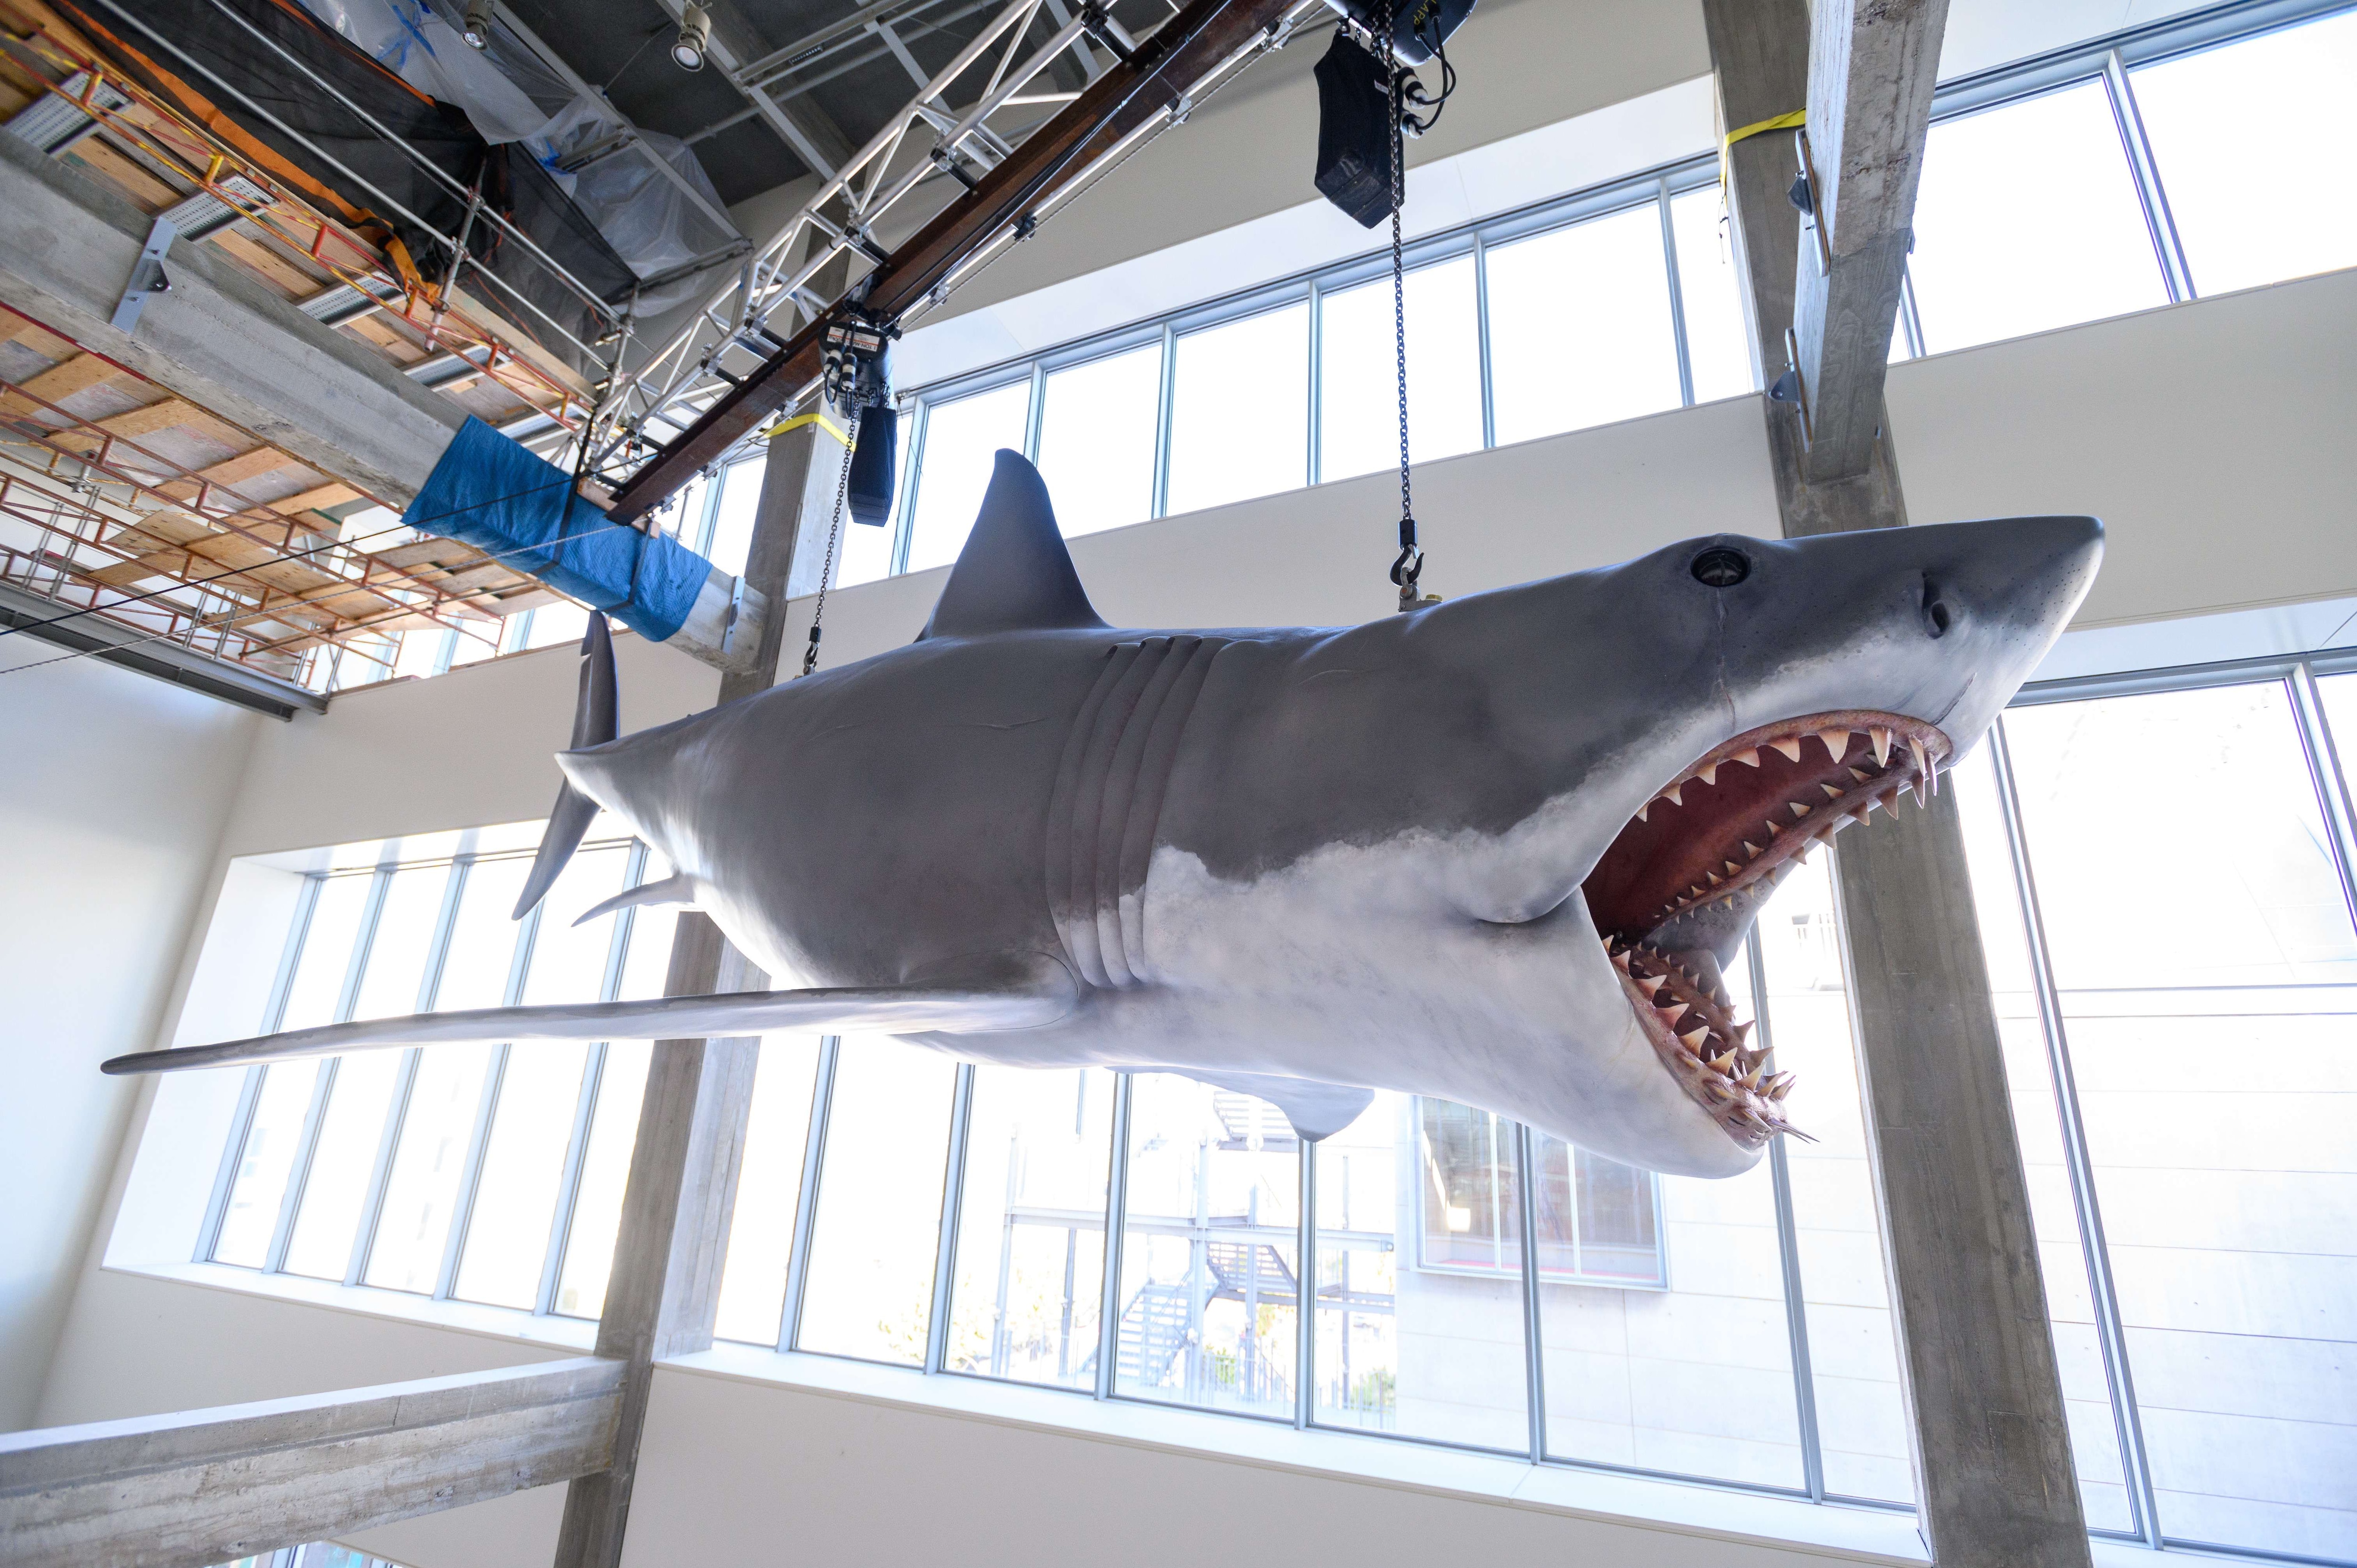 Bruce the Shark from Jaws at the Academy Museum